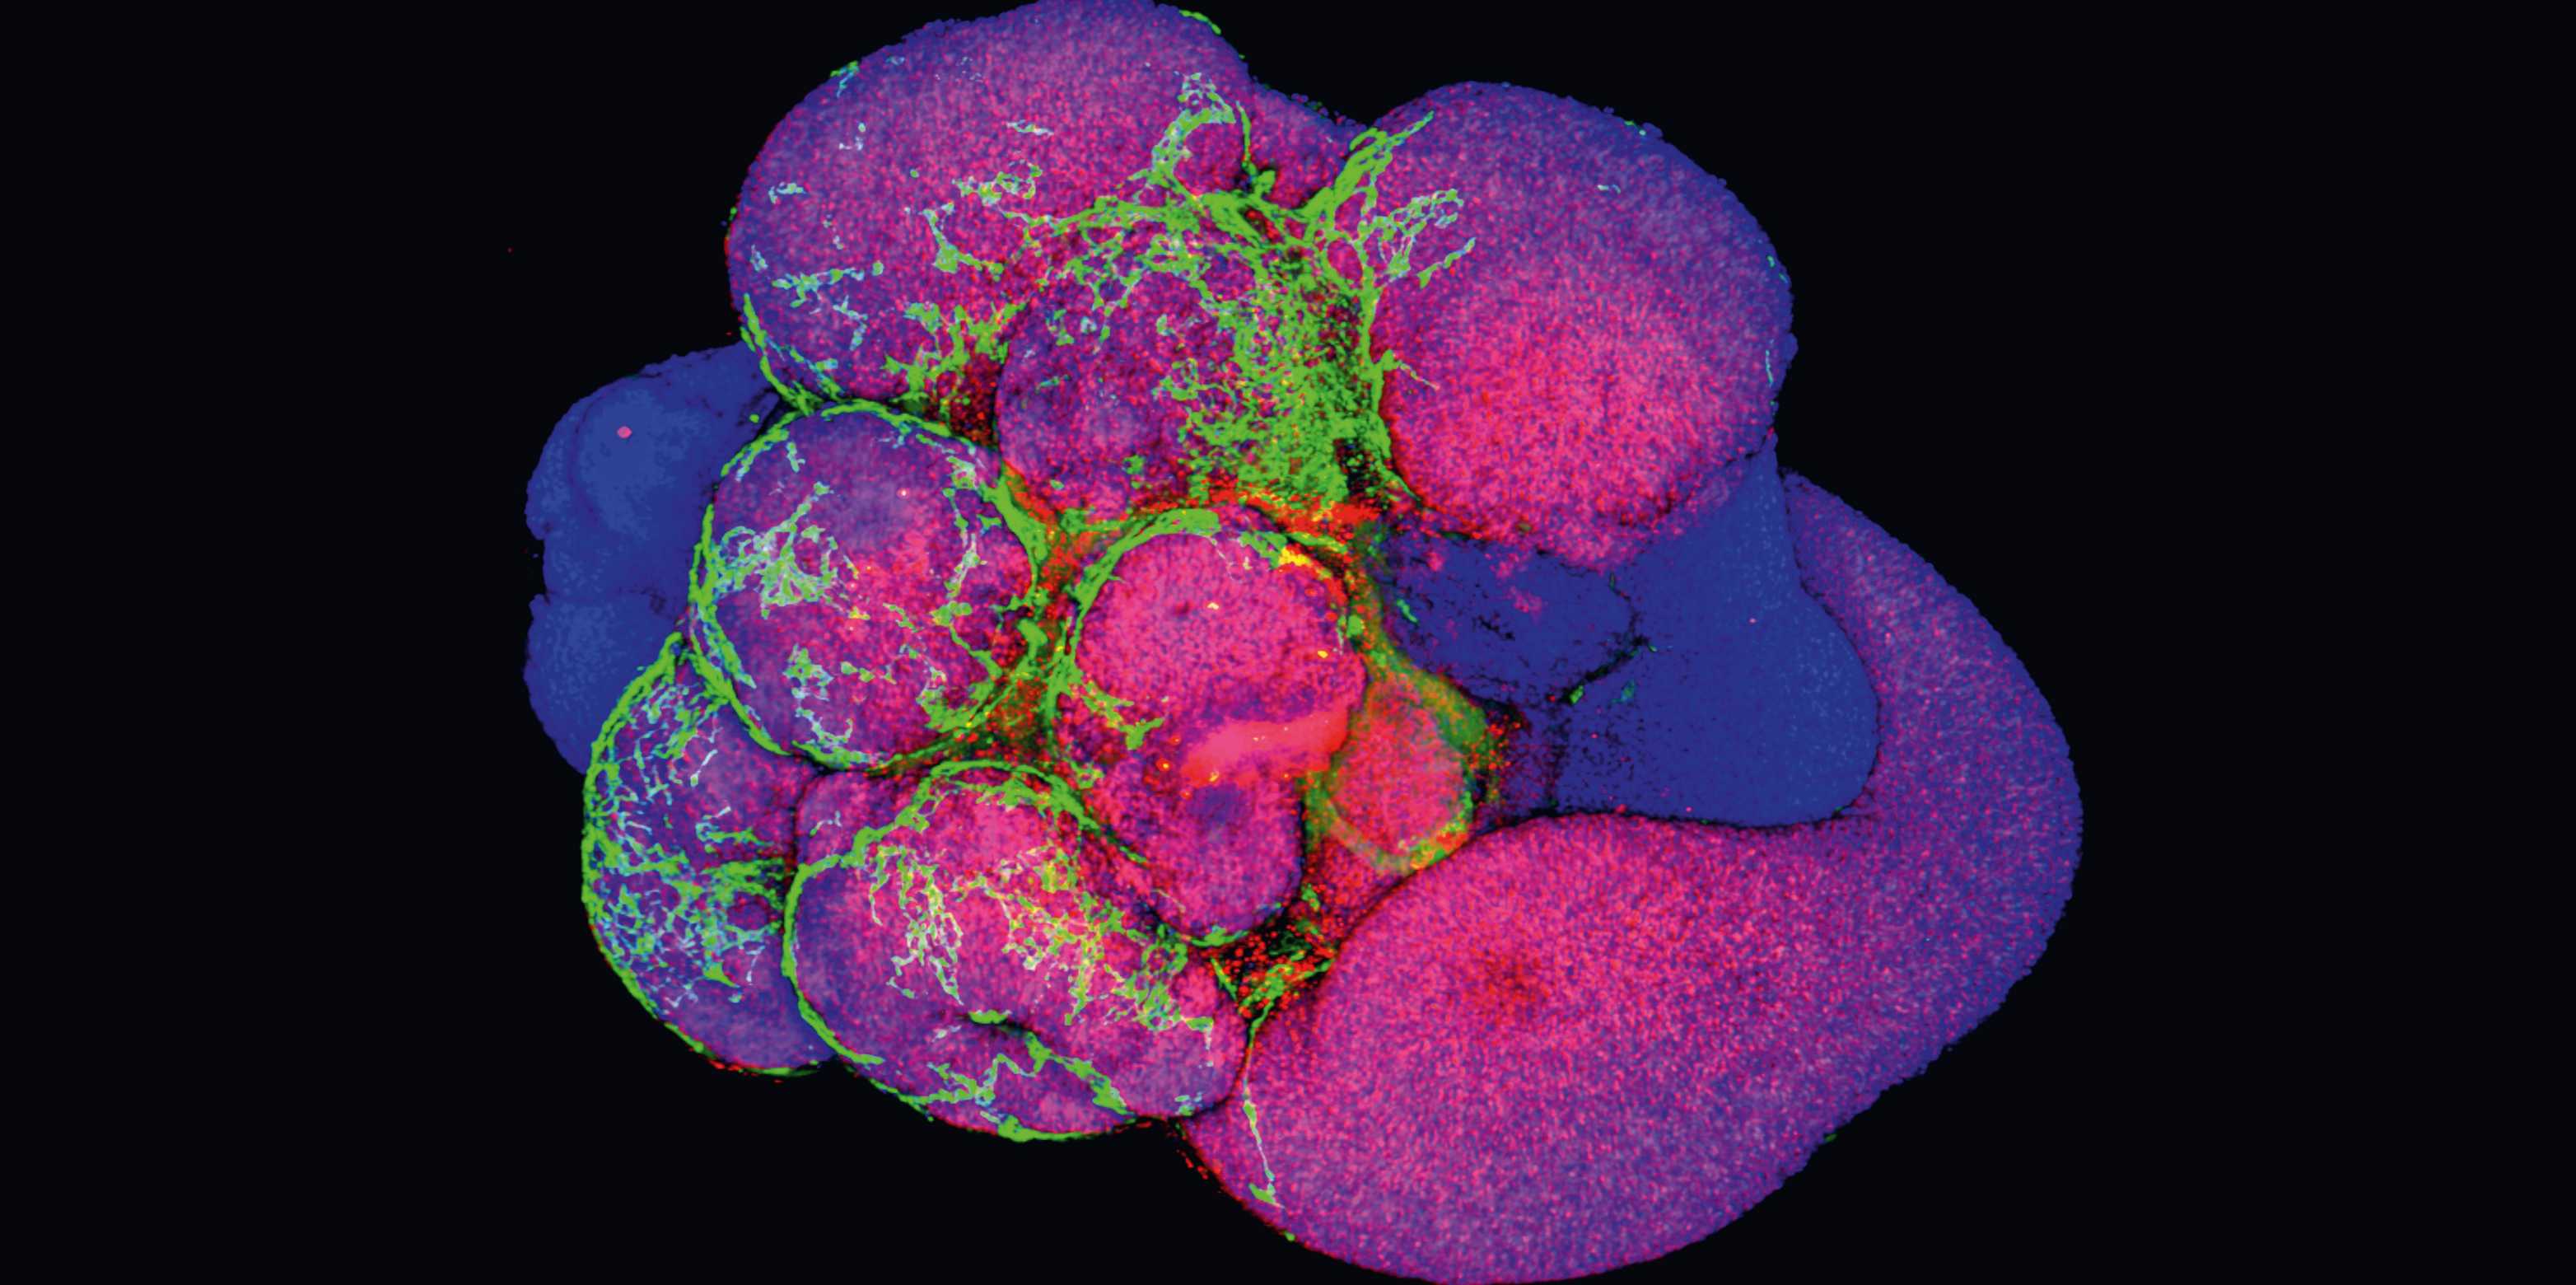 Brain organoid with visualized vascular structures